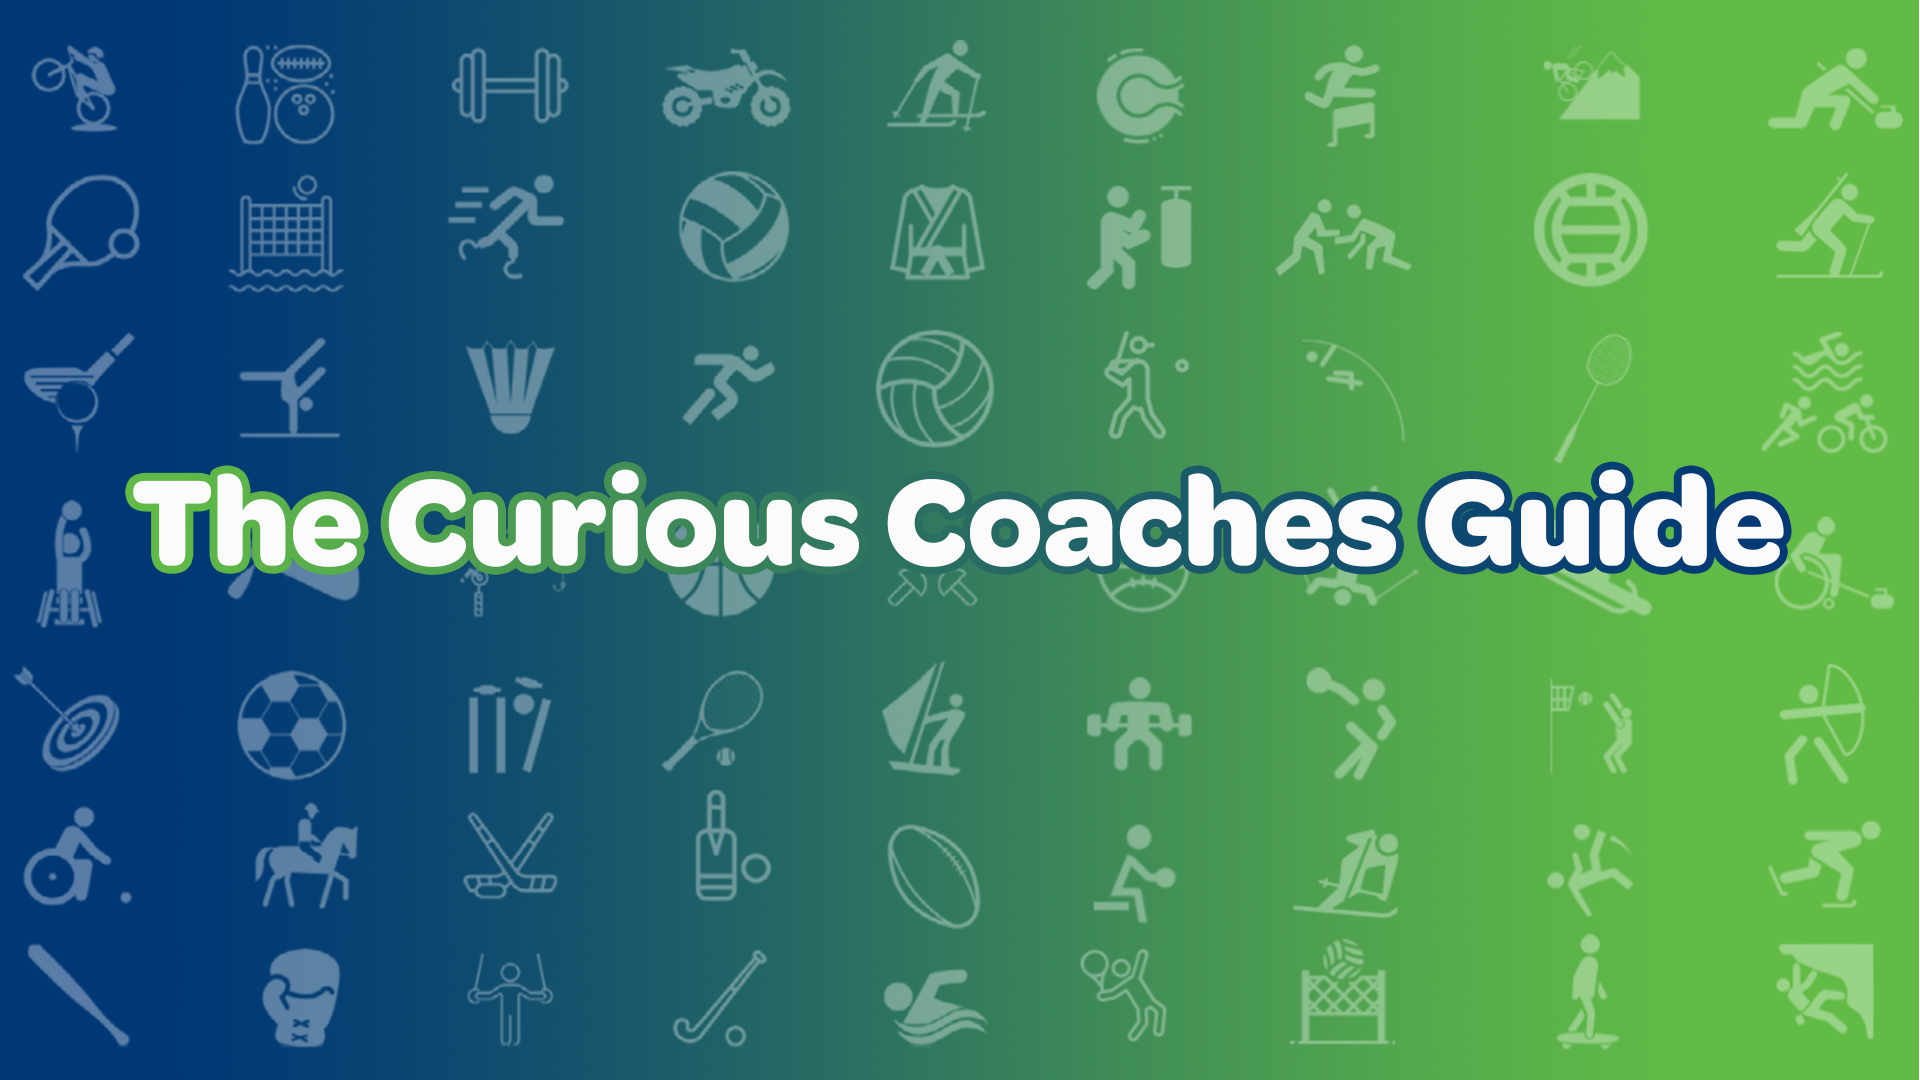 The Curious Coaches Guide